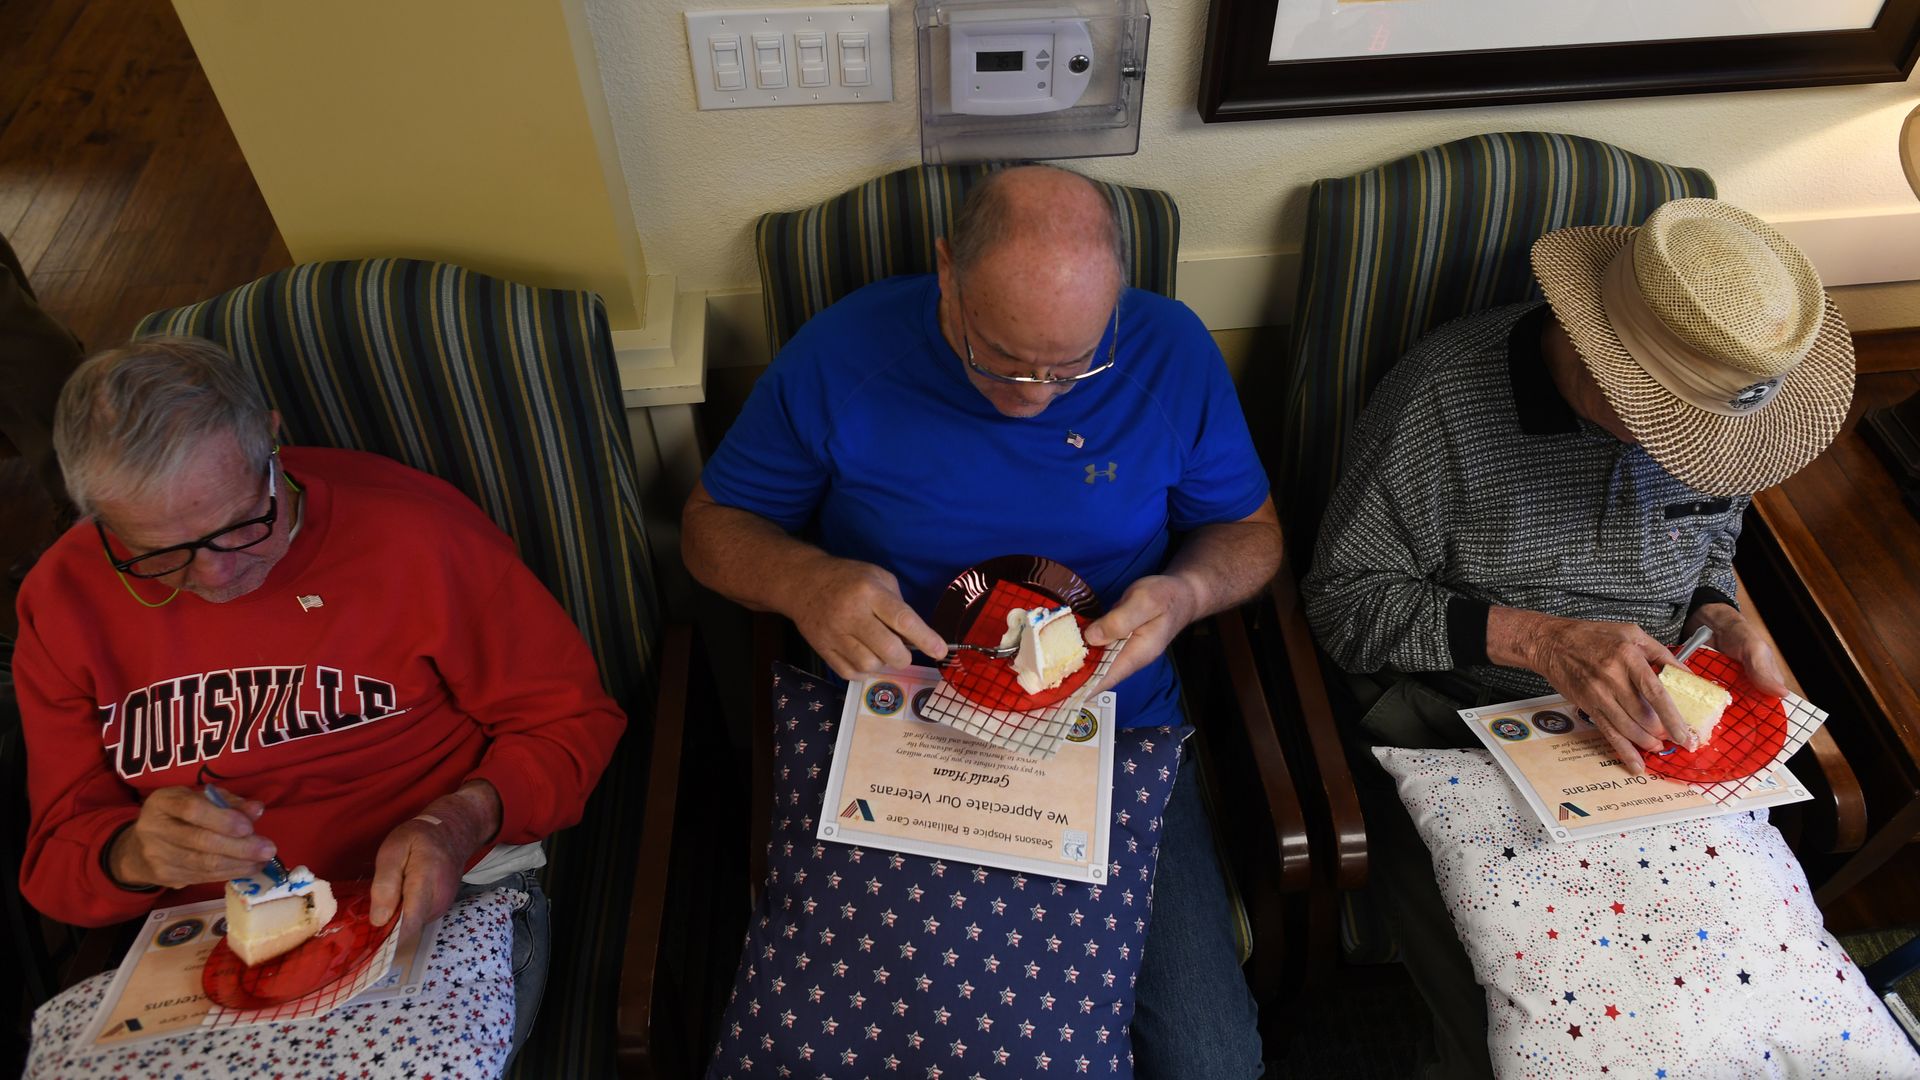 In this image, three seniors sit and eat cake. A few have blankets over their laps.